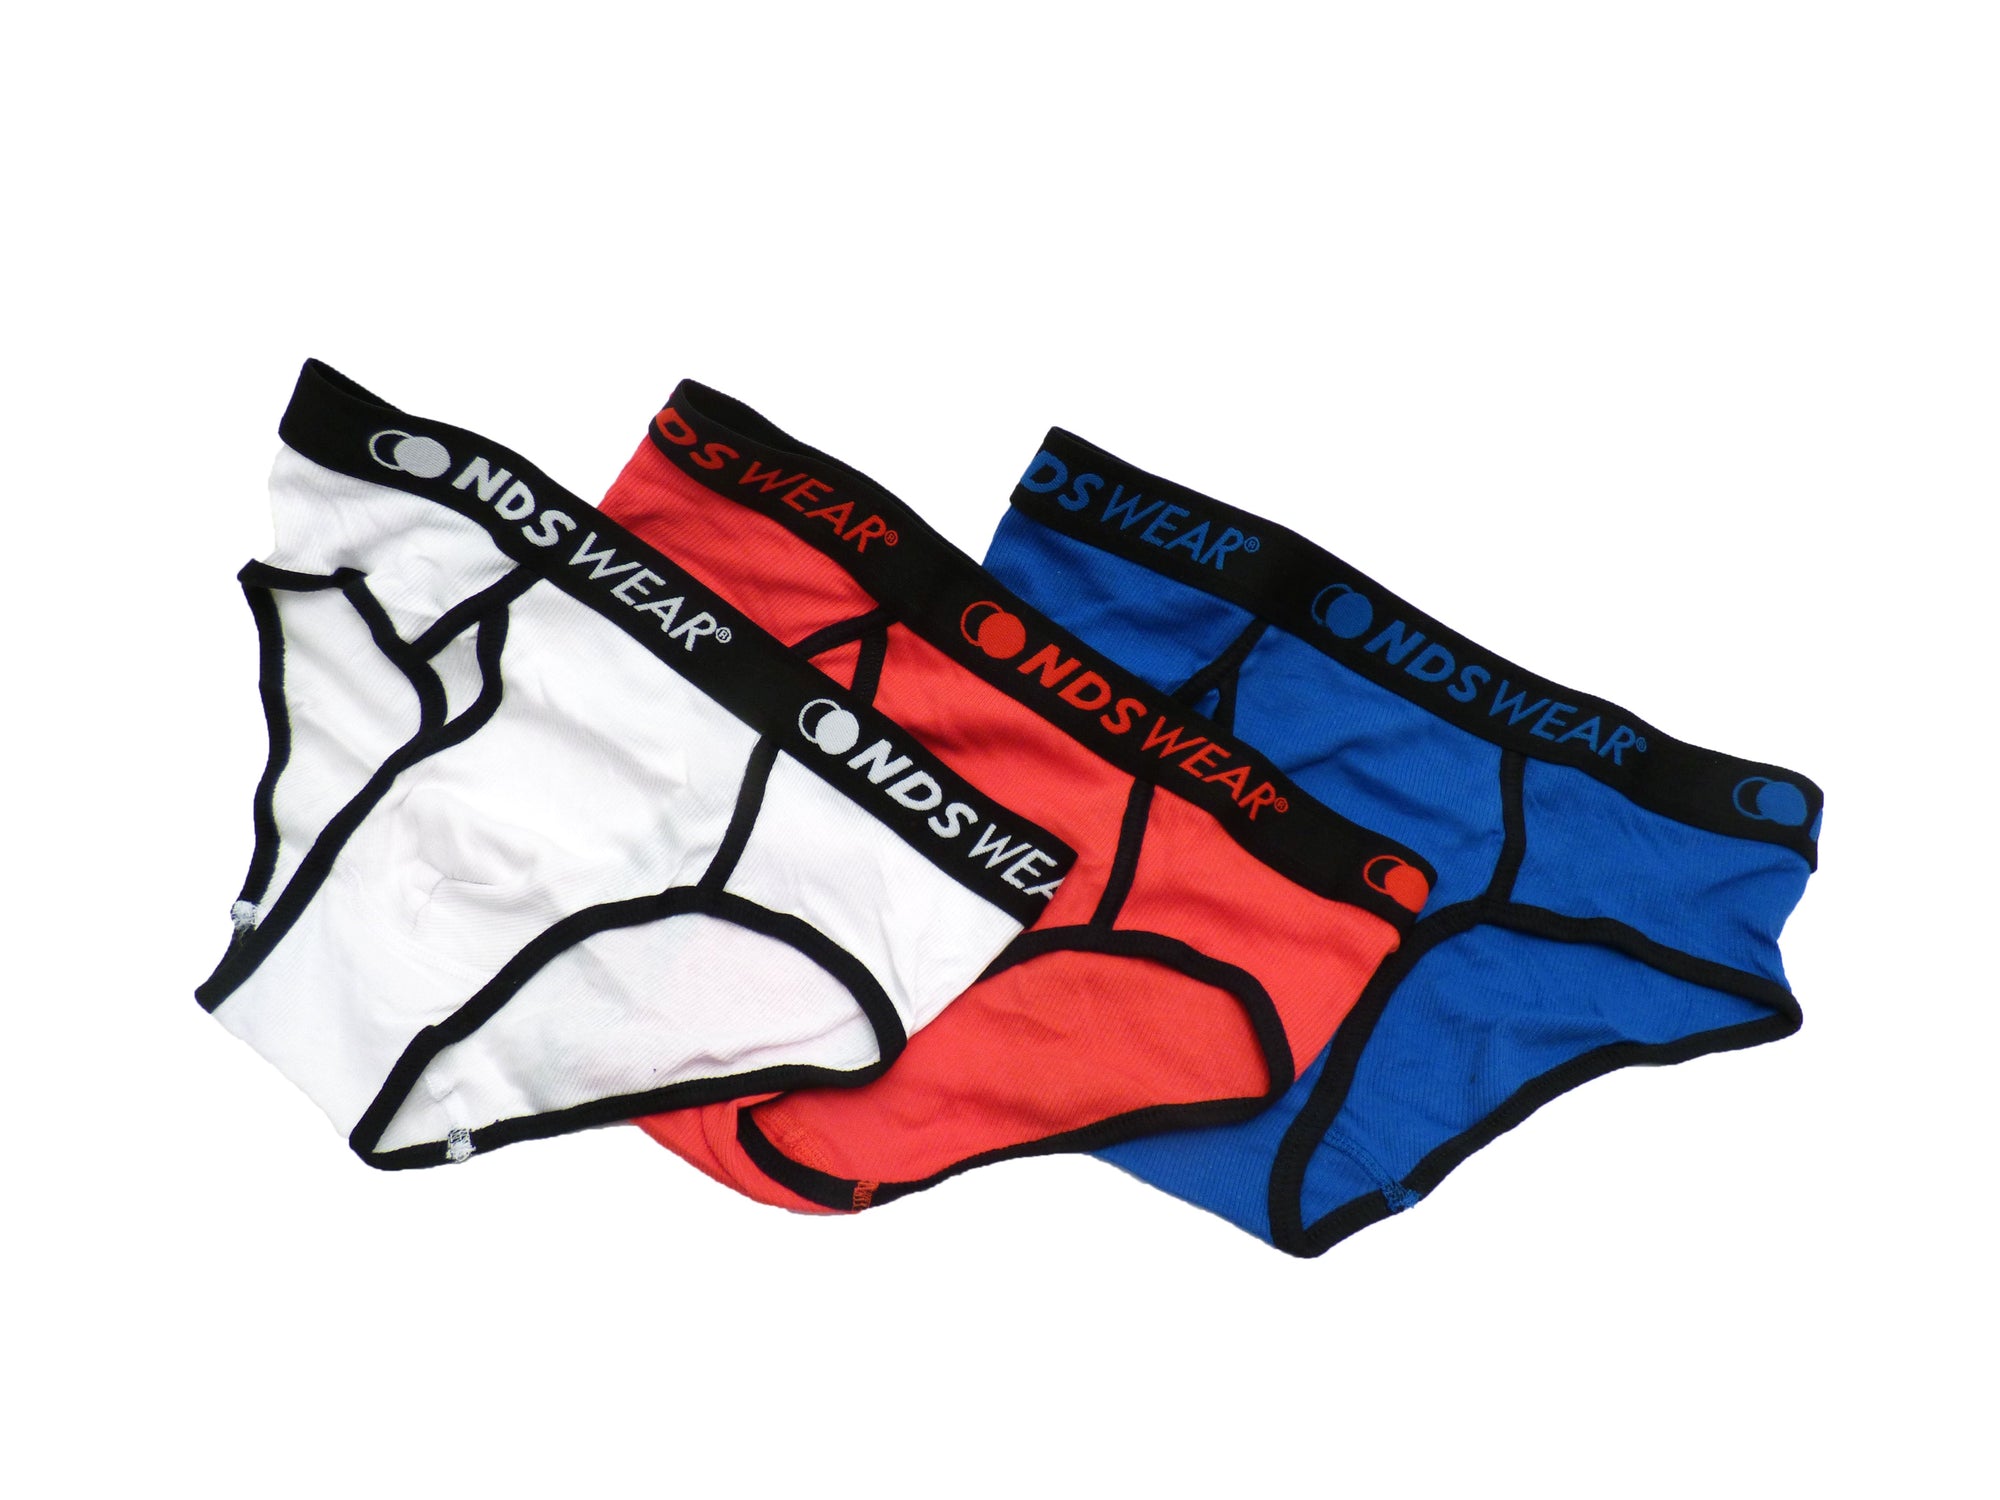 Ribbed Pouch Brief - 3 PACK Underwear for men by NDS Wear - ABC Underwear